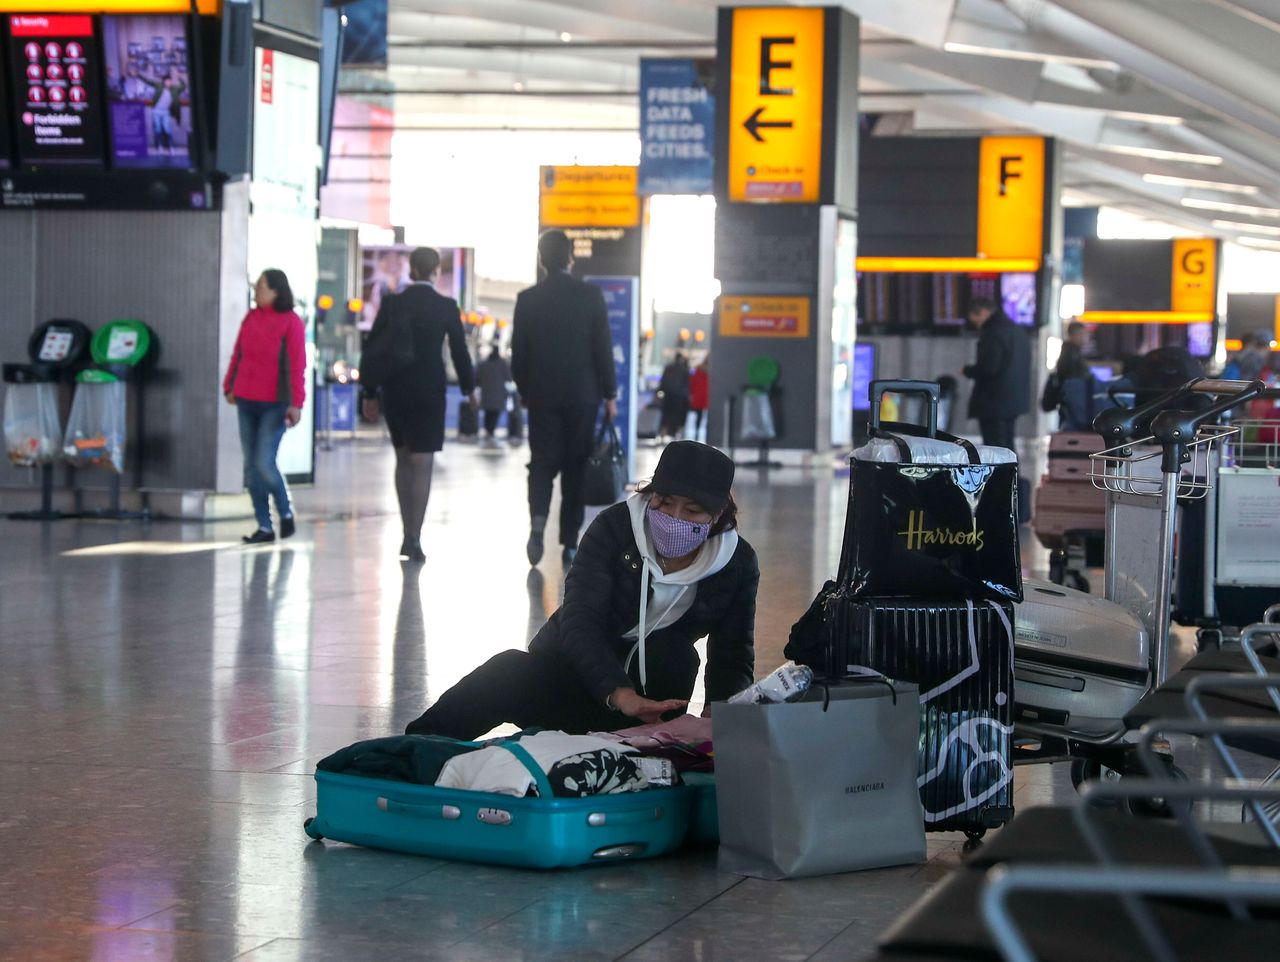 A woman wearing a face mask packs her suitcase in the departures area of Terminal 5 at Heathrow Airport, after it was announced British Airways had suspended all services to and from China.